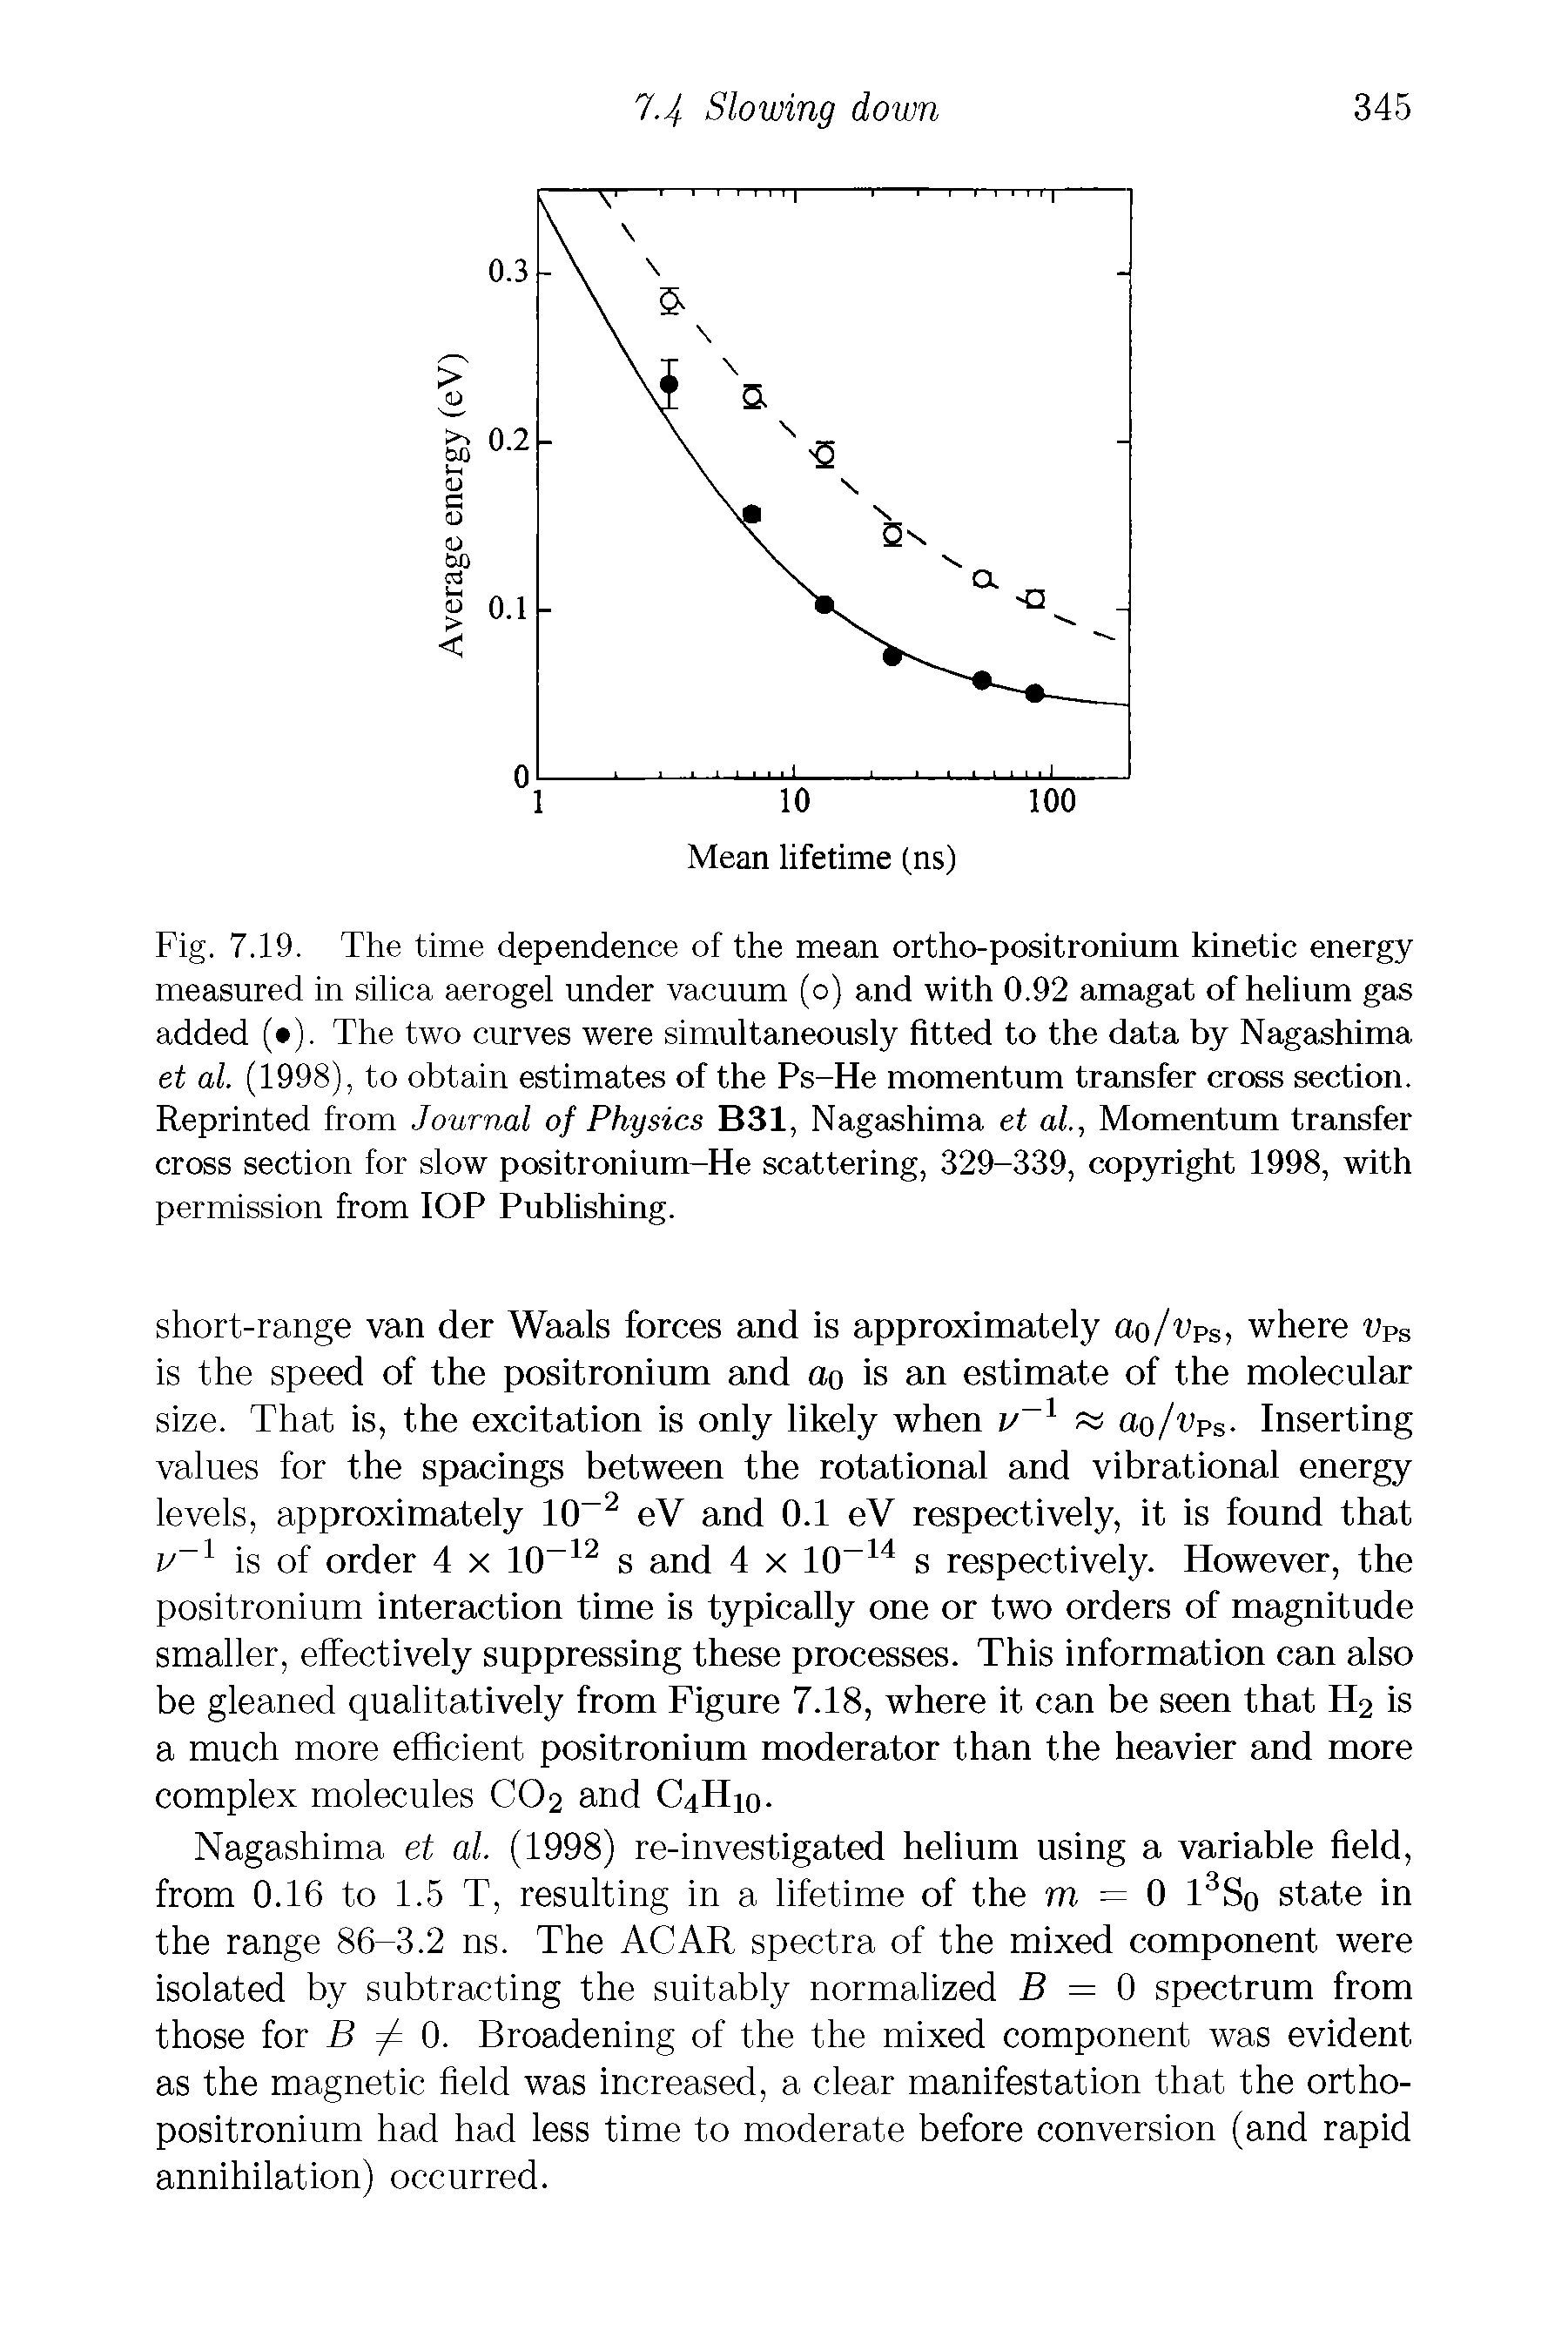 Fig. 7.19. The time dependence of the mean ortho-positronium kinetic energy measured in silica aerogel under vacuum (o) and with 0.92 amagat of helium gas added ( ). The two curves were simultaneously fitted to the data by Nagashima et al. (1998), to obtain estimates of the Ps-He momentum transfer cross section. Reprinted from Journal of Physics B31, Nagashima et al, Momentum transfer cross section for slow positronium-He scattering, 329-339, copyright 1998, with permission from IOP Publishing.